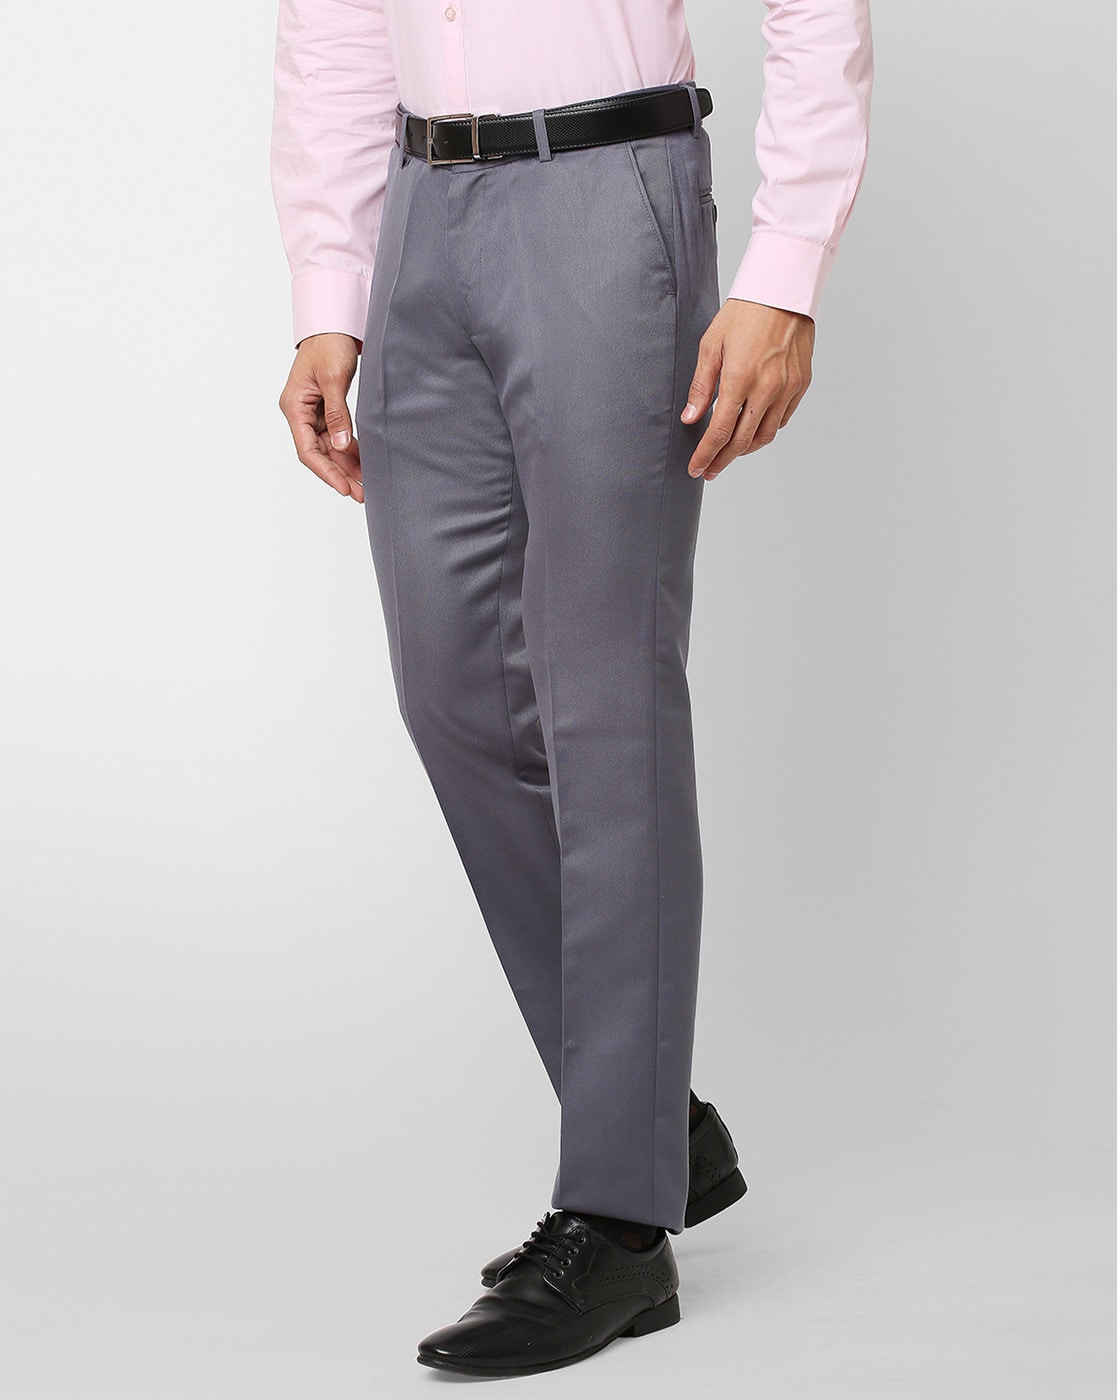 Buy NowMen Navy Structured Formal Trousers  Style Union